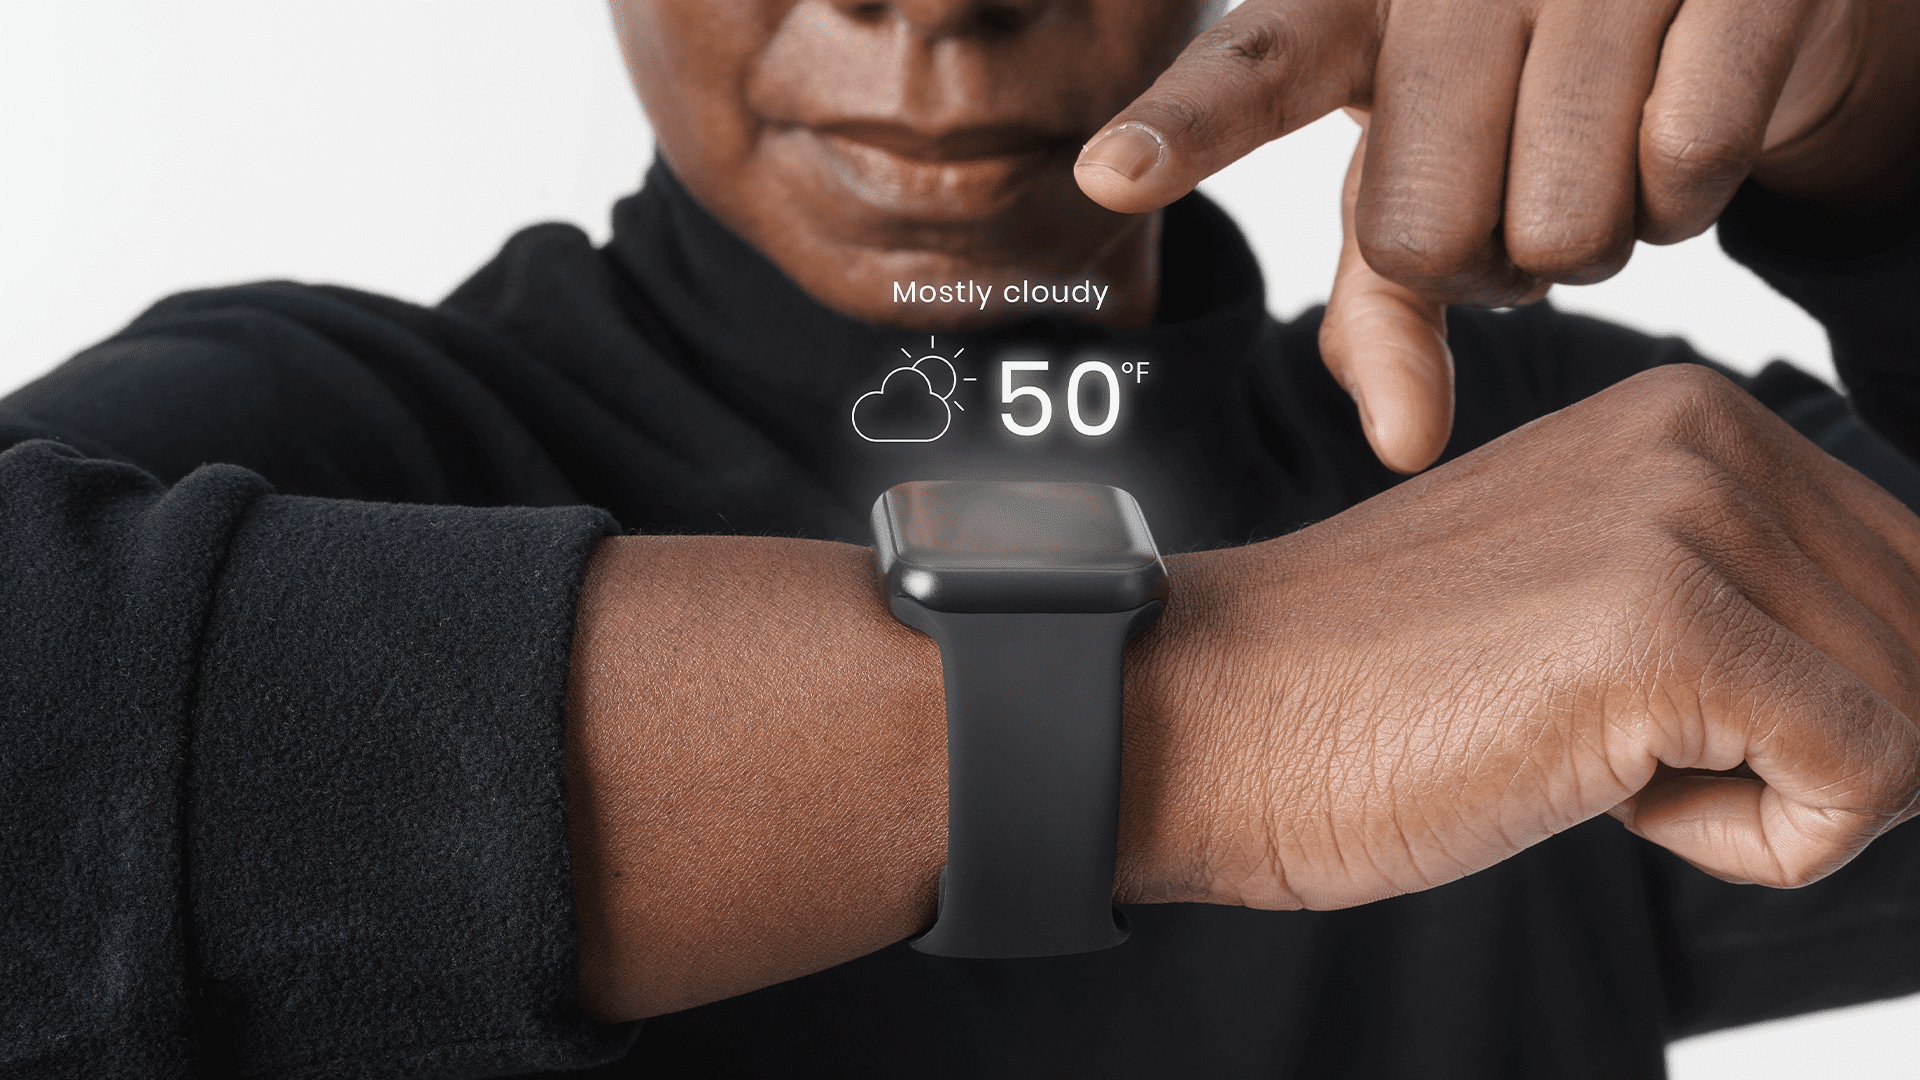 The image shows a person touching a smart watch, symbolizing haptic feedbacks.